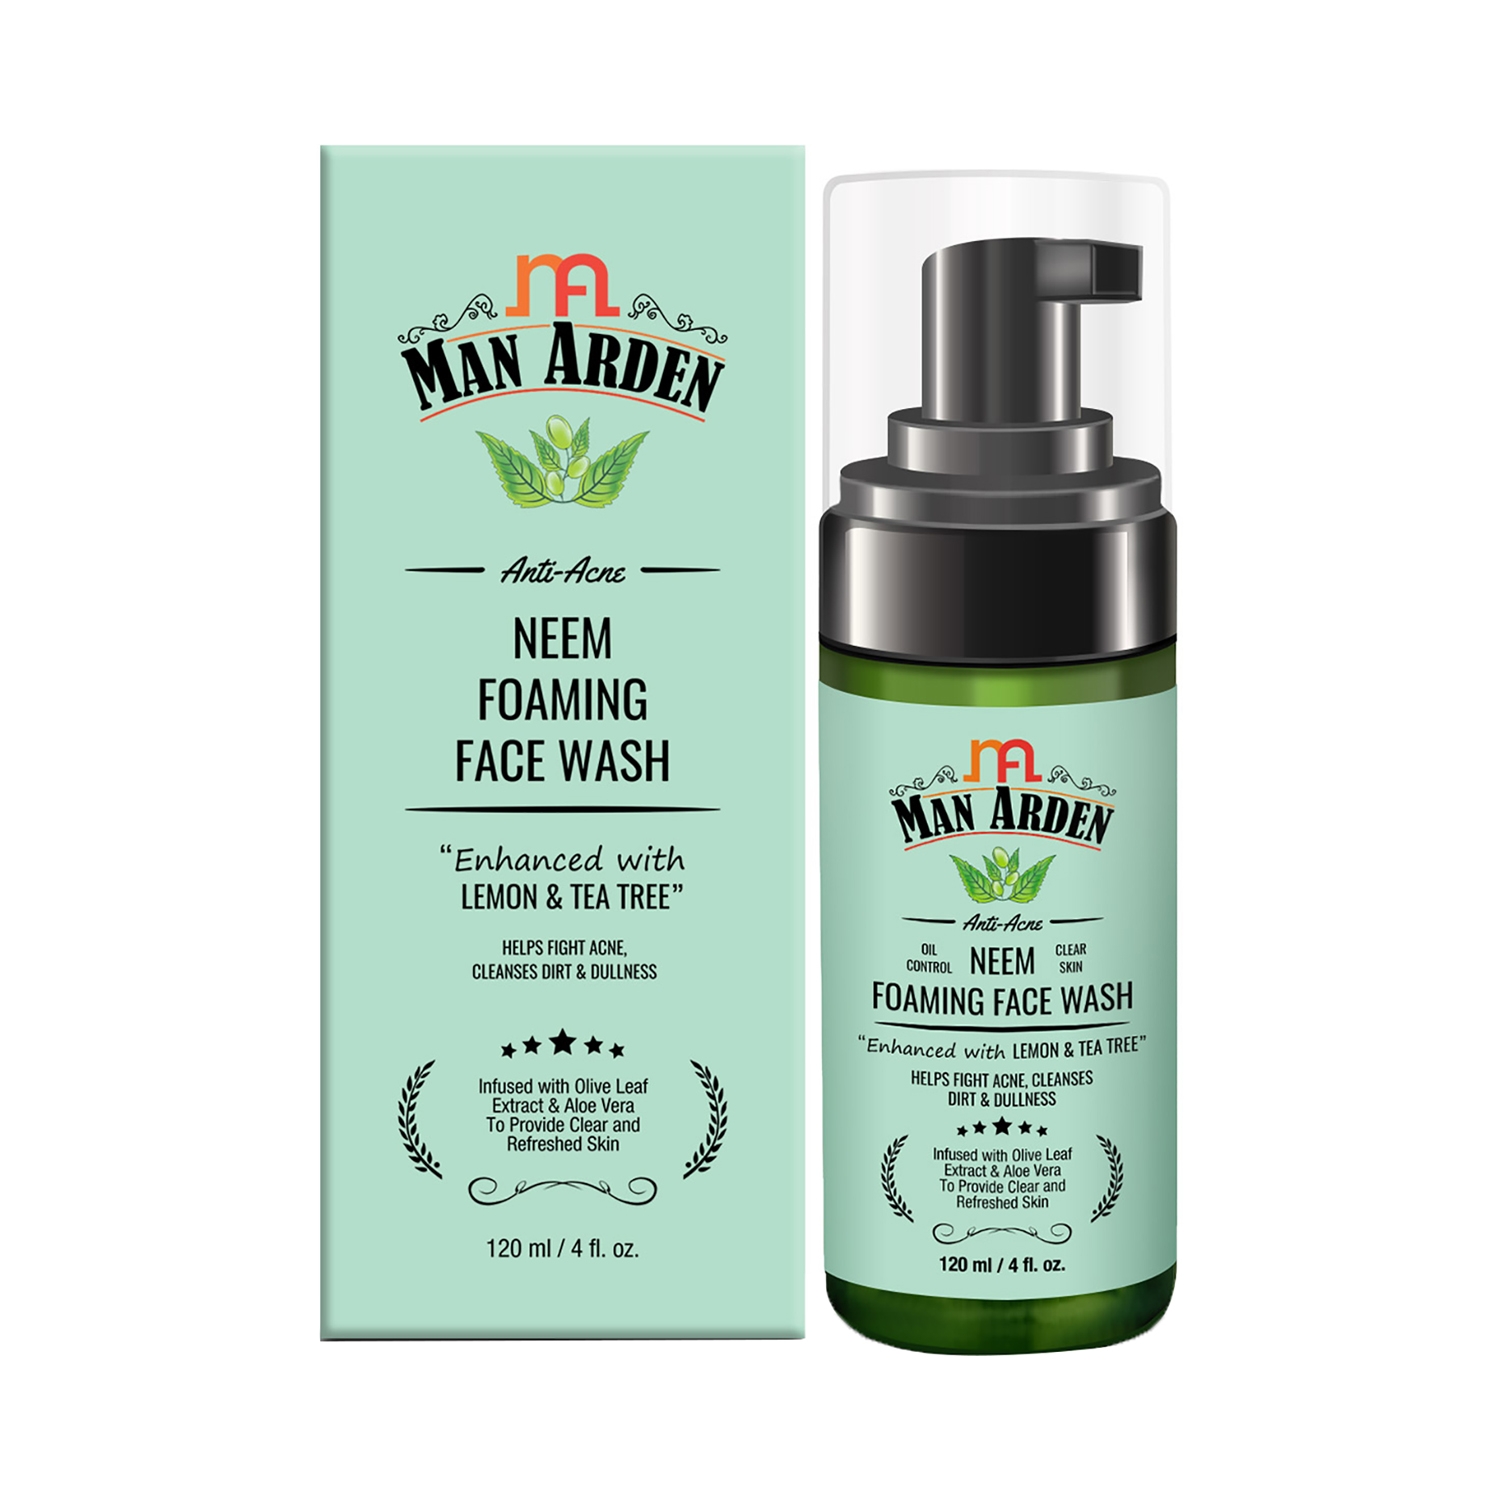 Man Arden | Man Arden Anti-Acne Neem Foaming Face Wash Helps Fight Acne, Cleanses Dirt & Dullness Infused With Olive Leaf Extract & Aloe Vera (120ml)